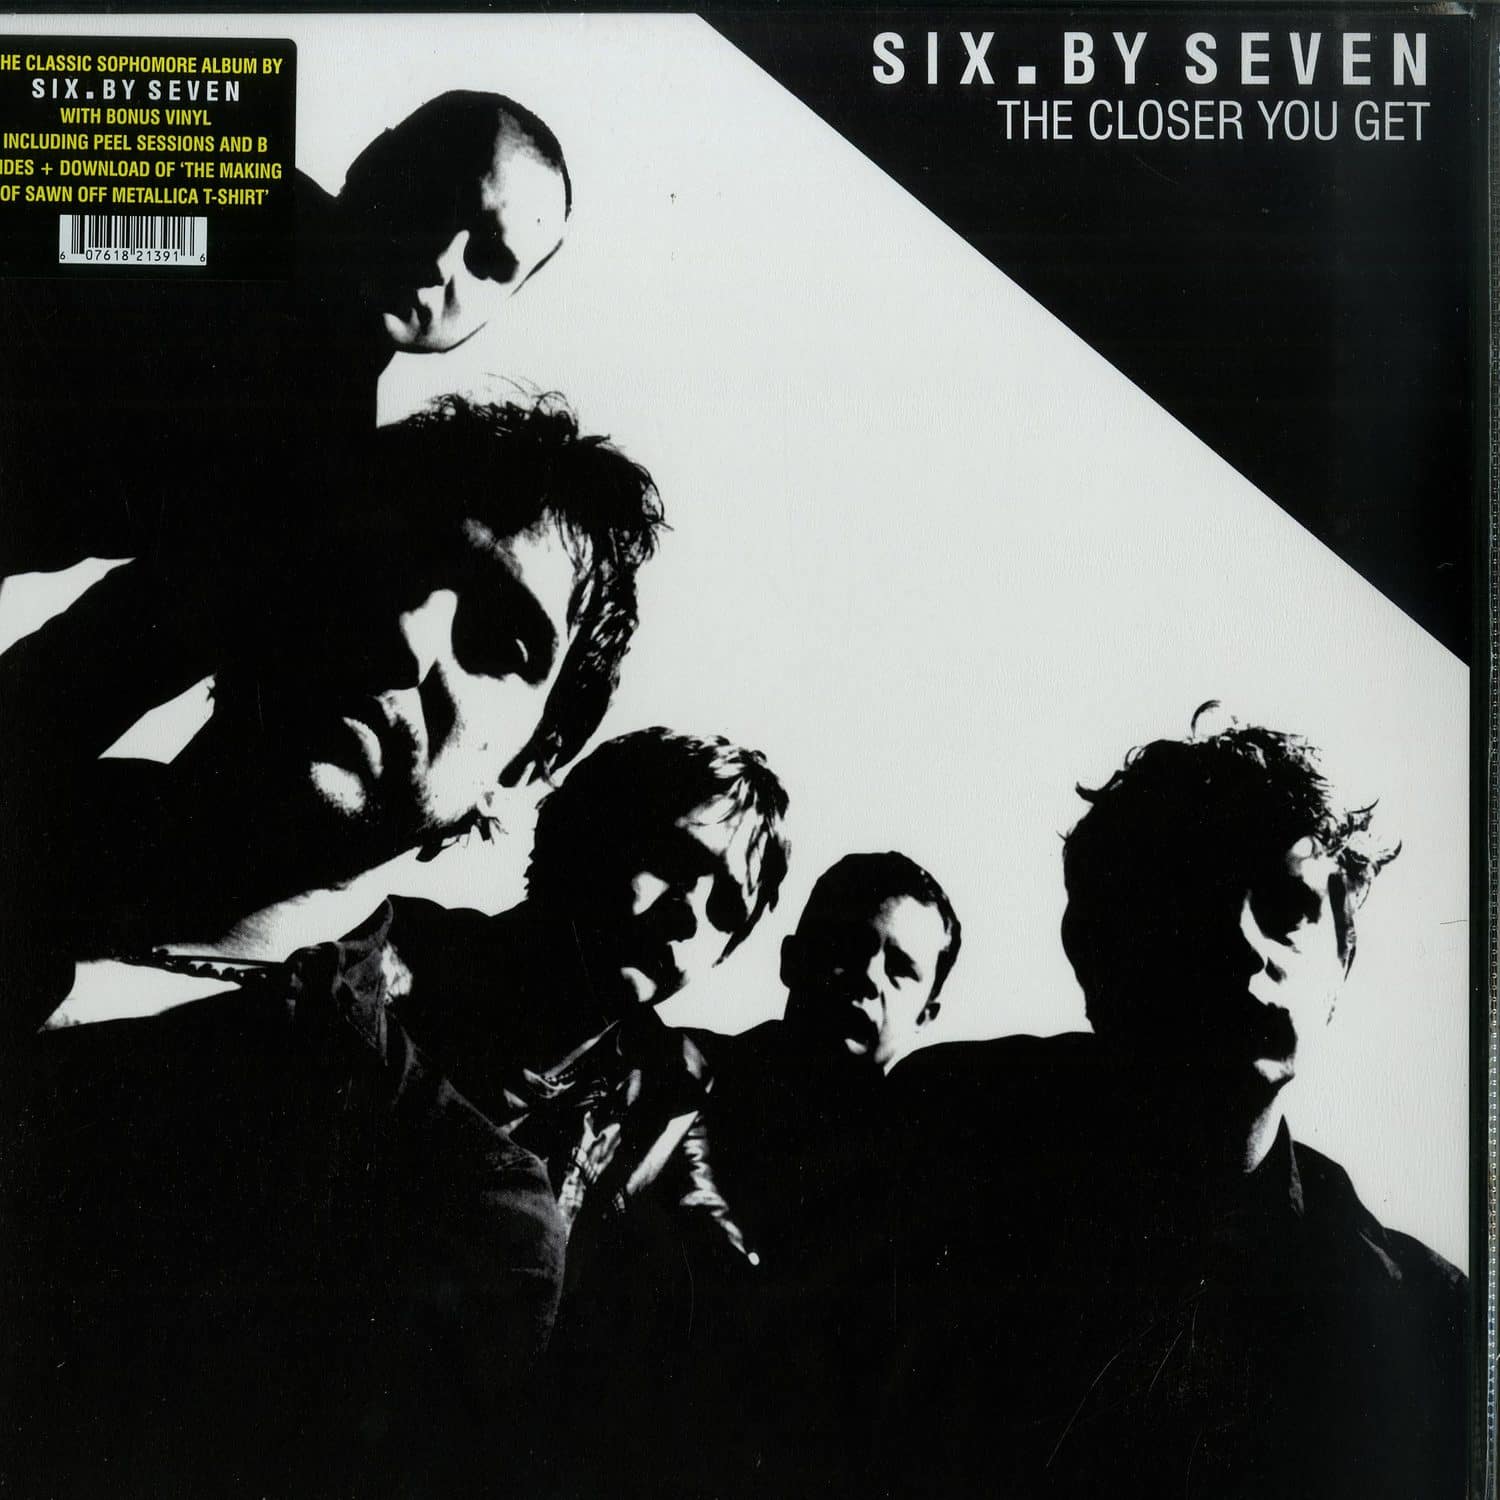 Six By Seven - THE CLOSER YOU GET + PEEL SESSIONS & B-SIDES 